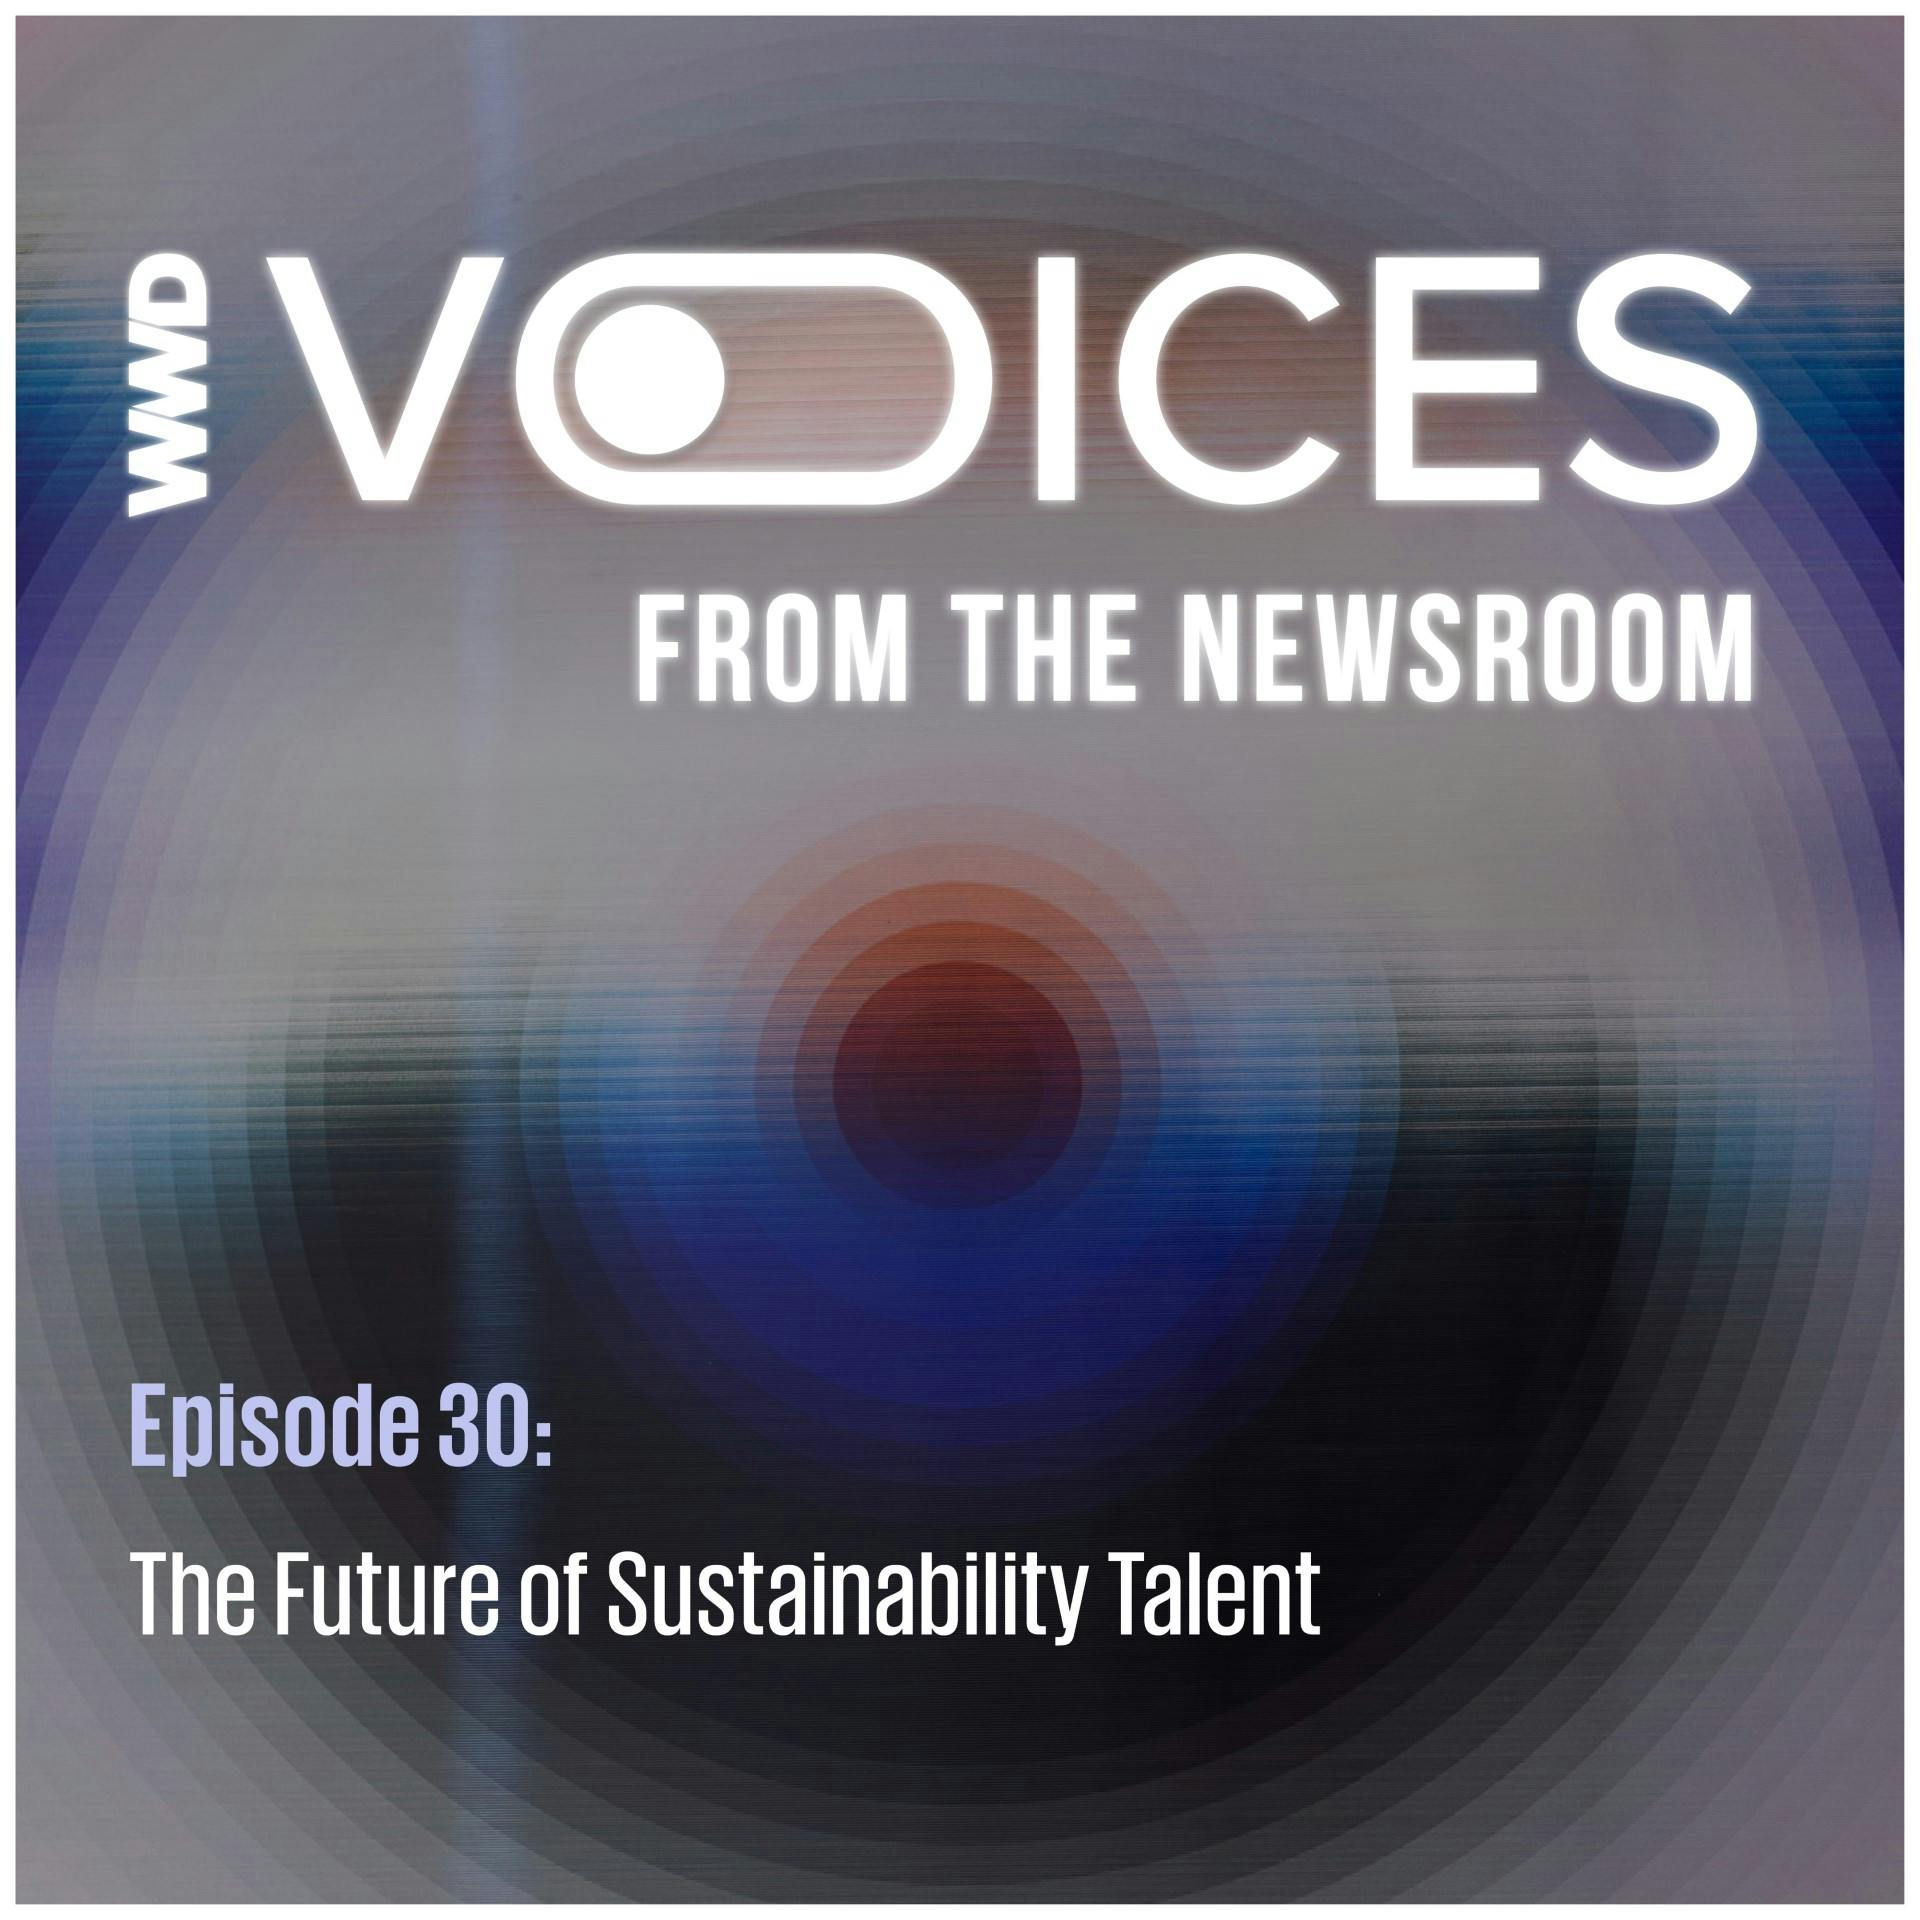 The Future of Sustainability Talent